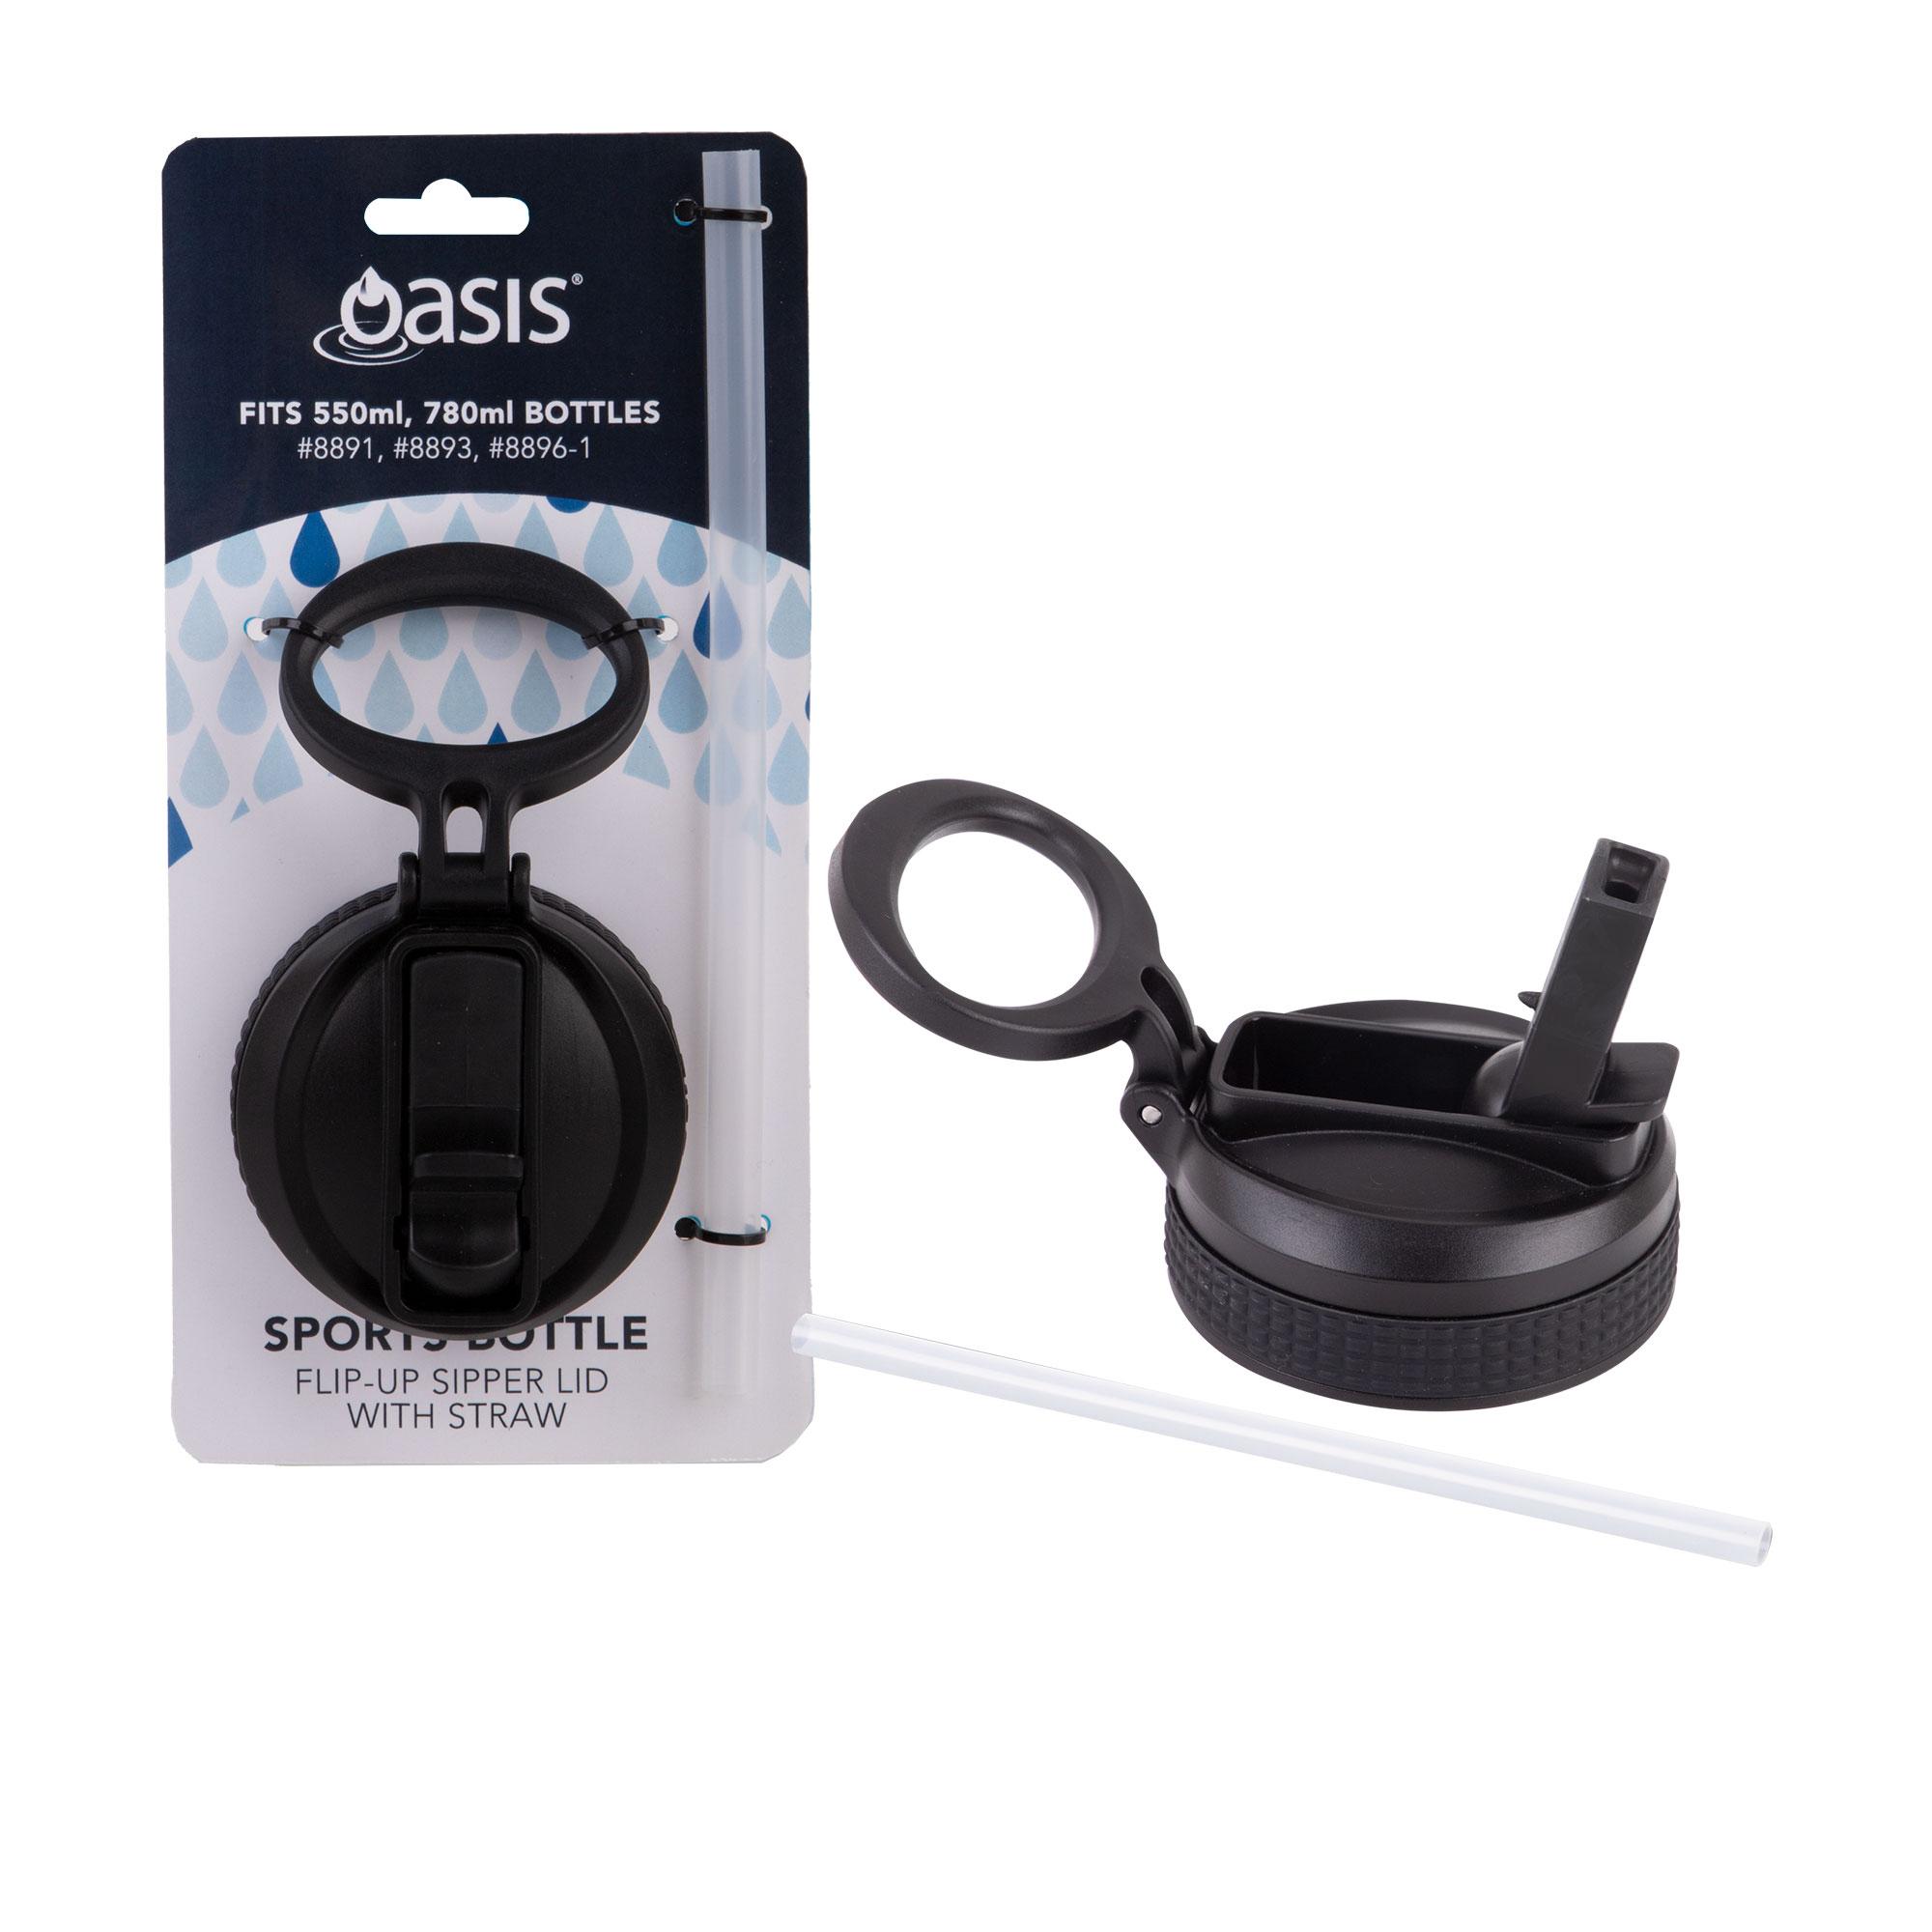 Oasis Challenger Sipper Ports Bottle Lid and 1 Straw Carded Black Image 5